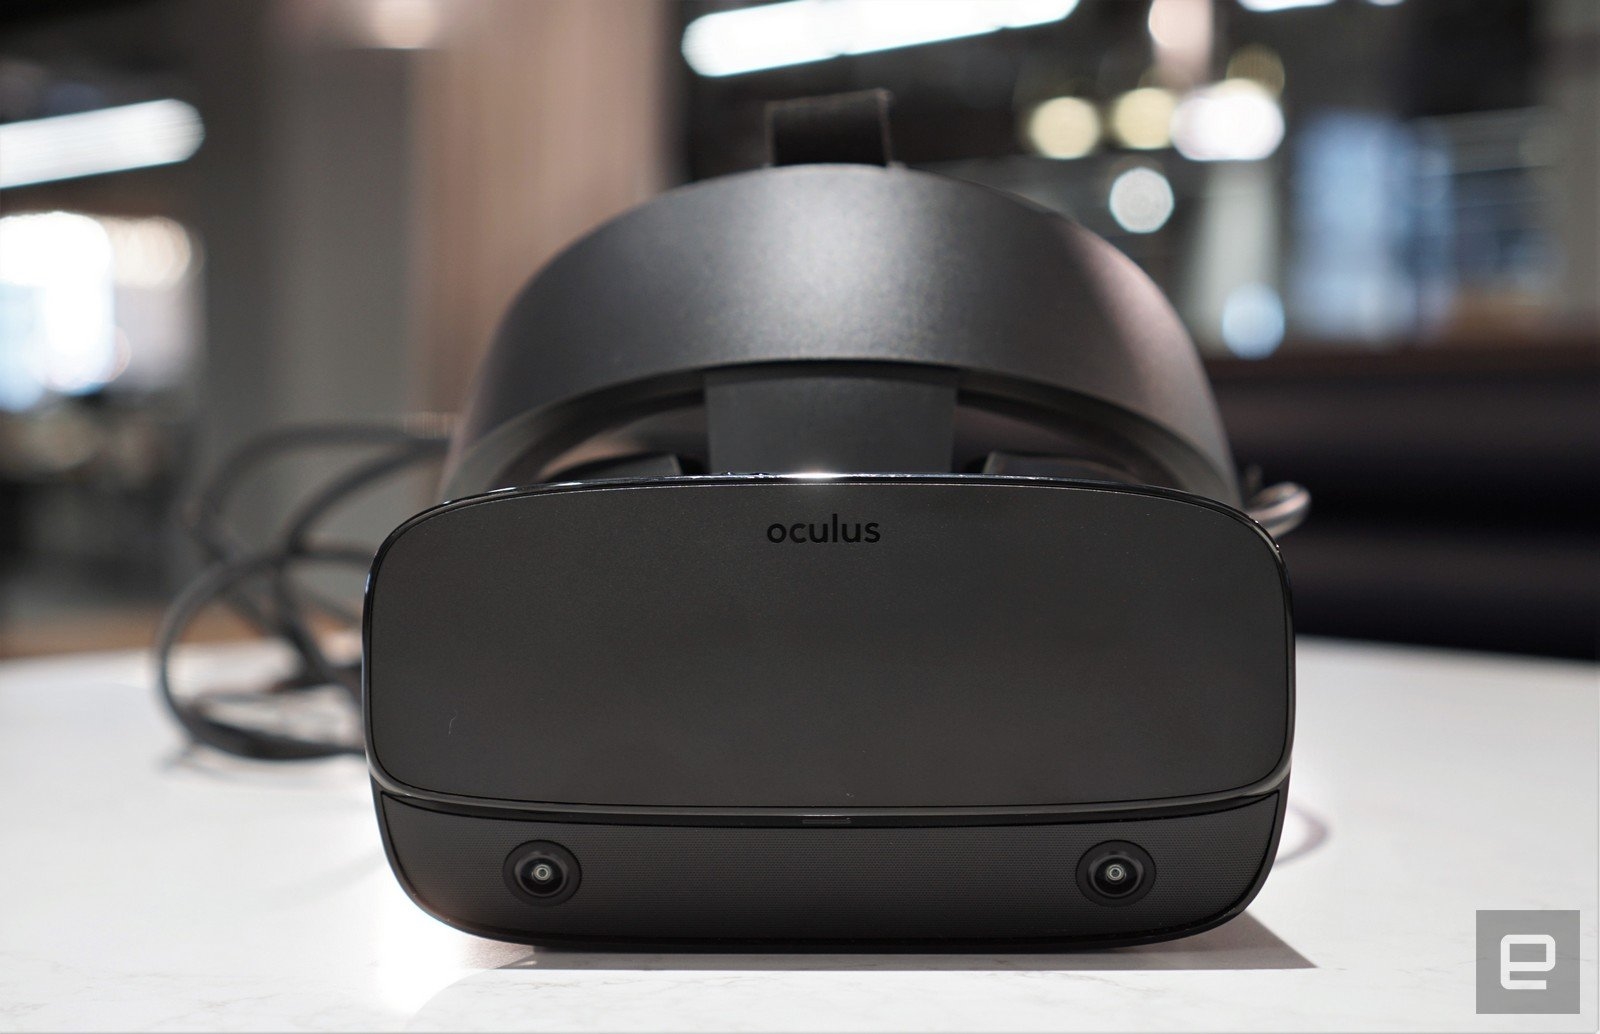 Oculus Rift S review: Just another tethered VR headset | DeviceDaily.com